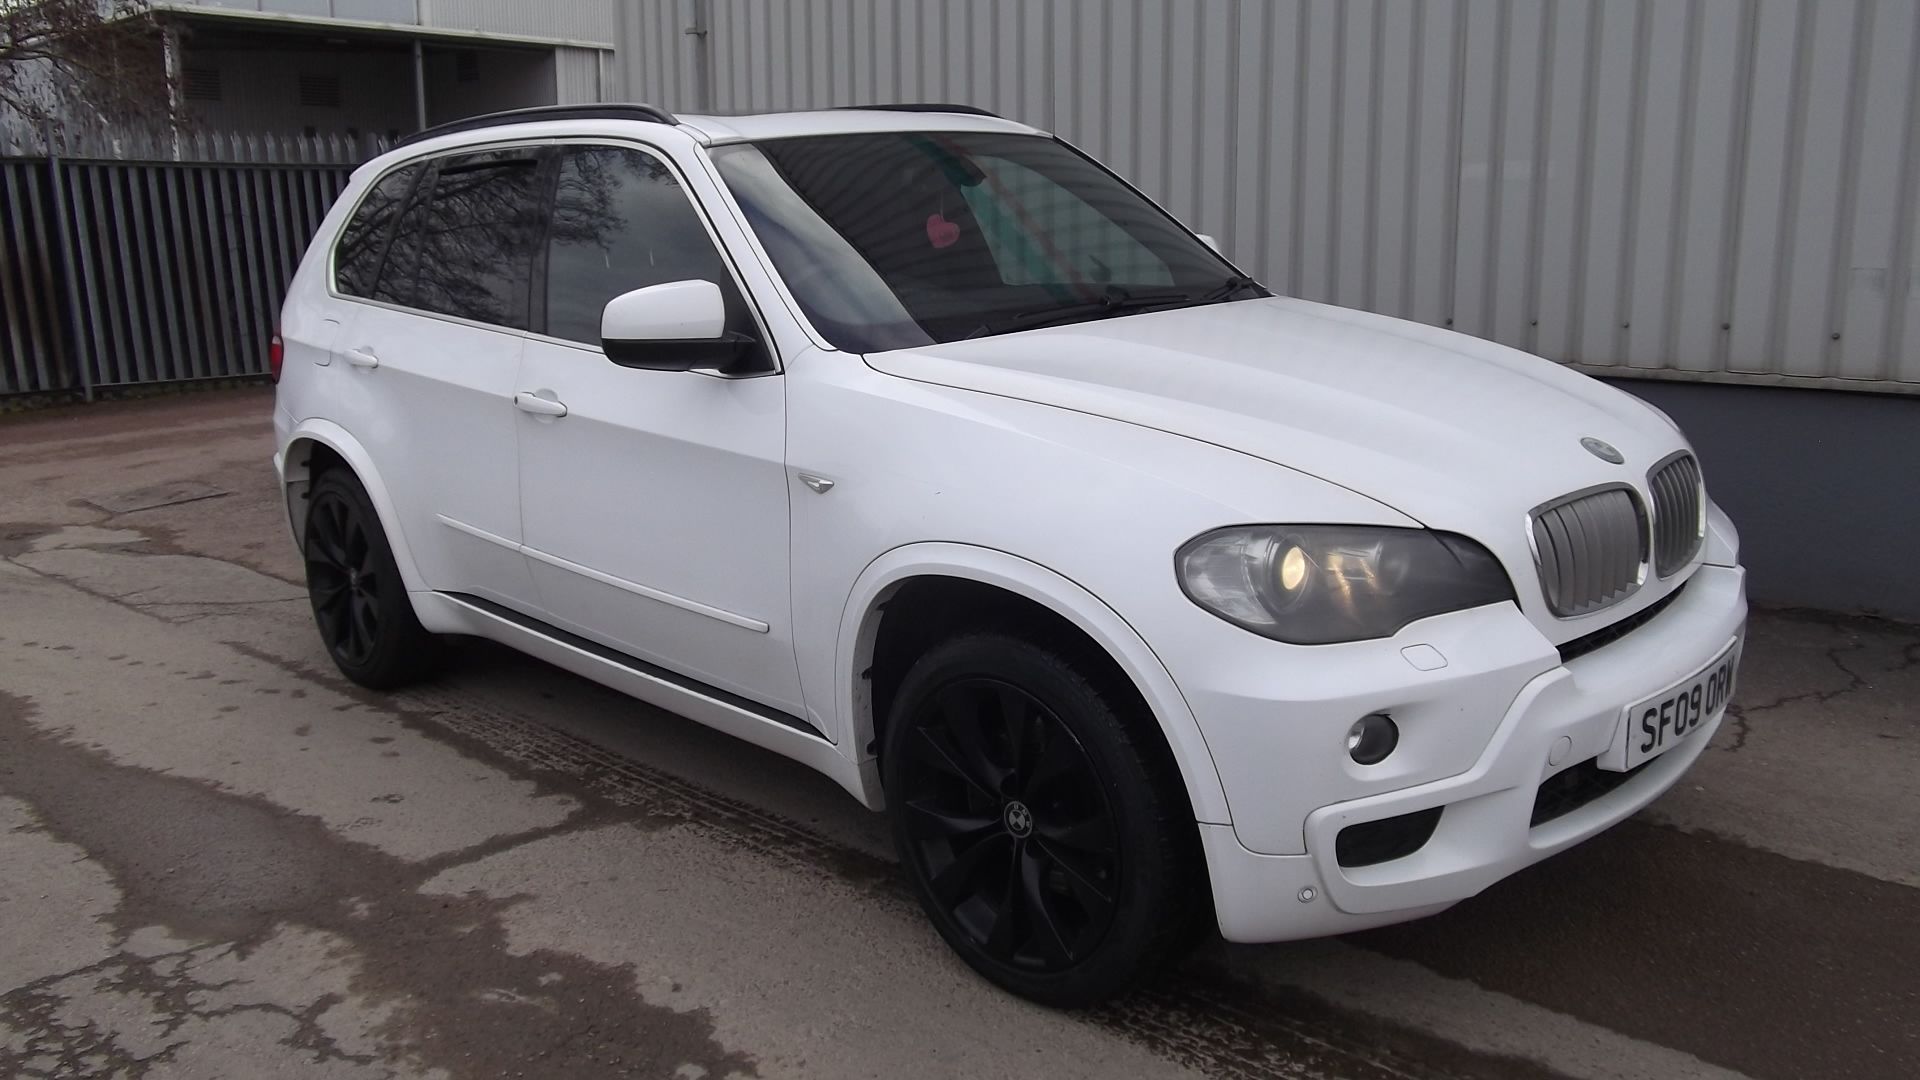 2009 BMW X5 35D M Sport X Drive 3.0 5 Dr 4x4 - CL505 - NO VAT ON THE HAMM - Image 3 of 22